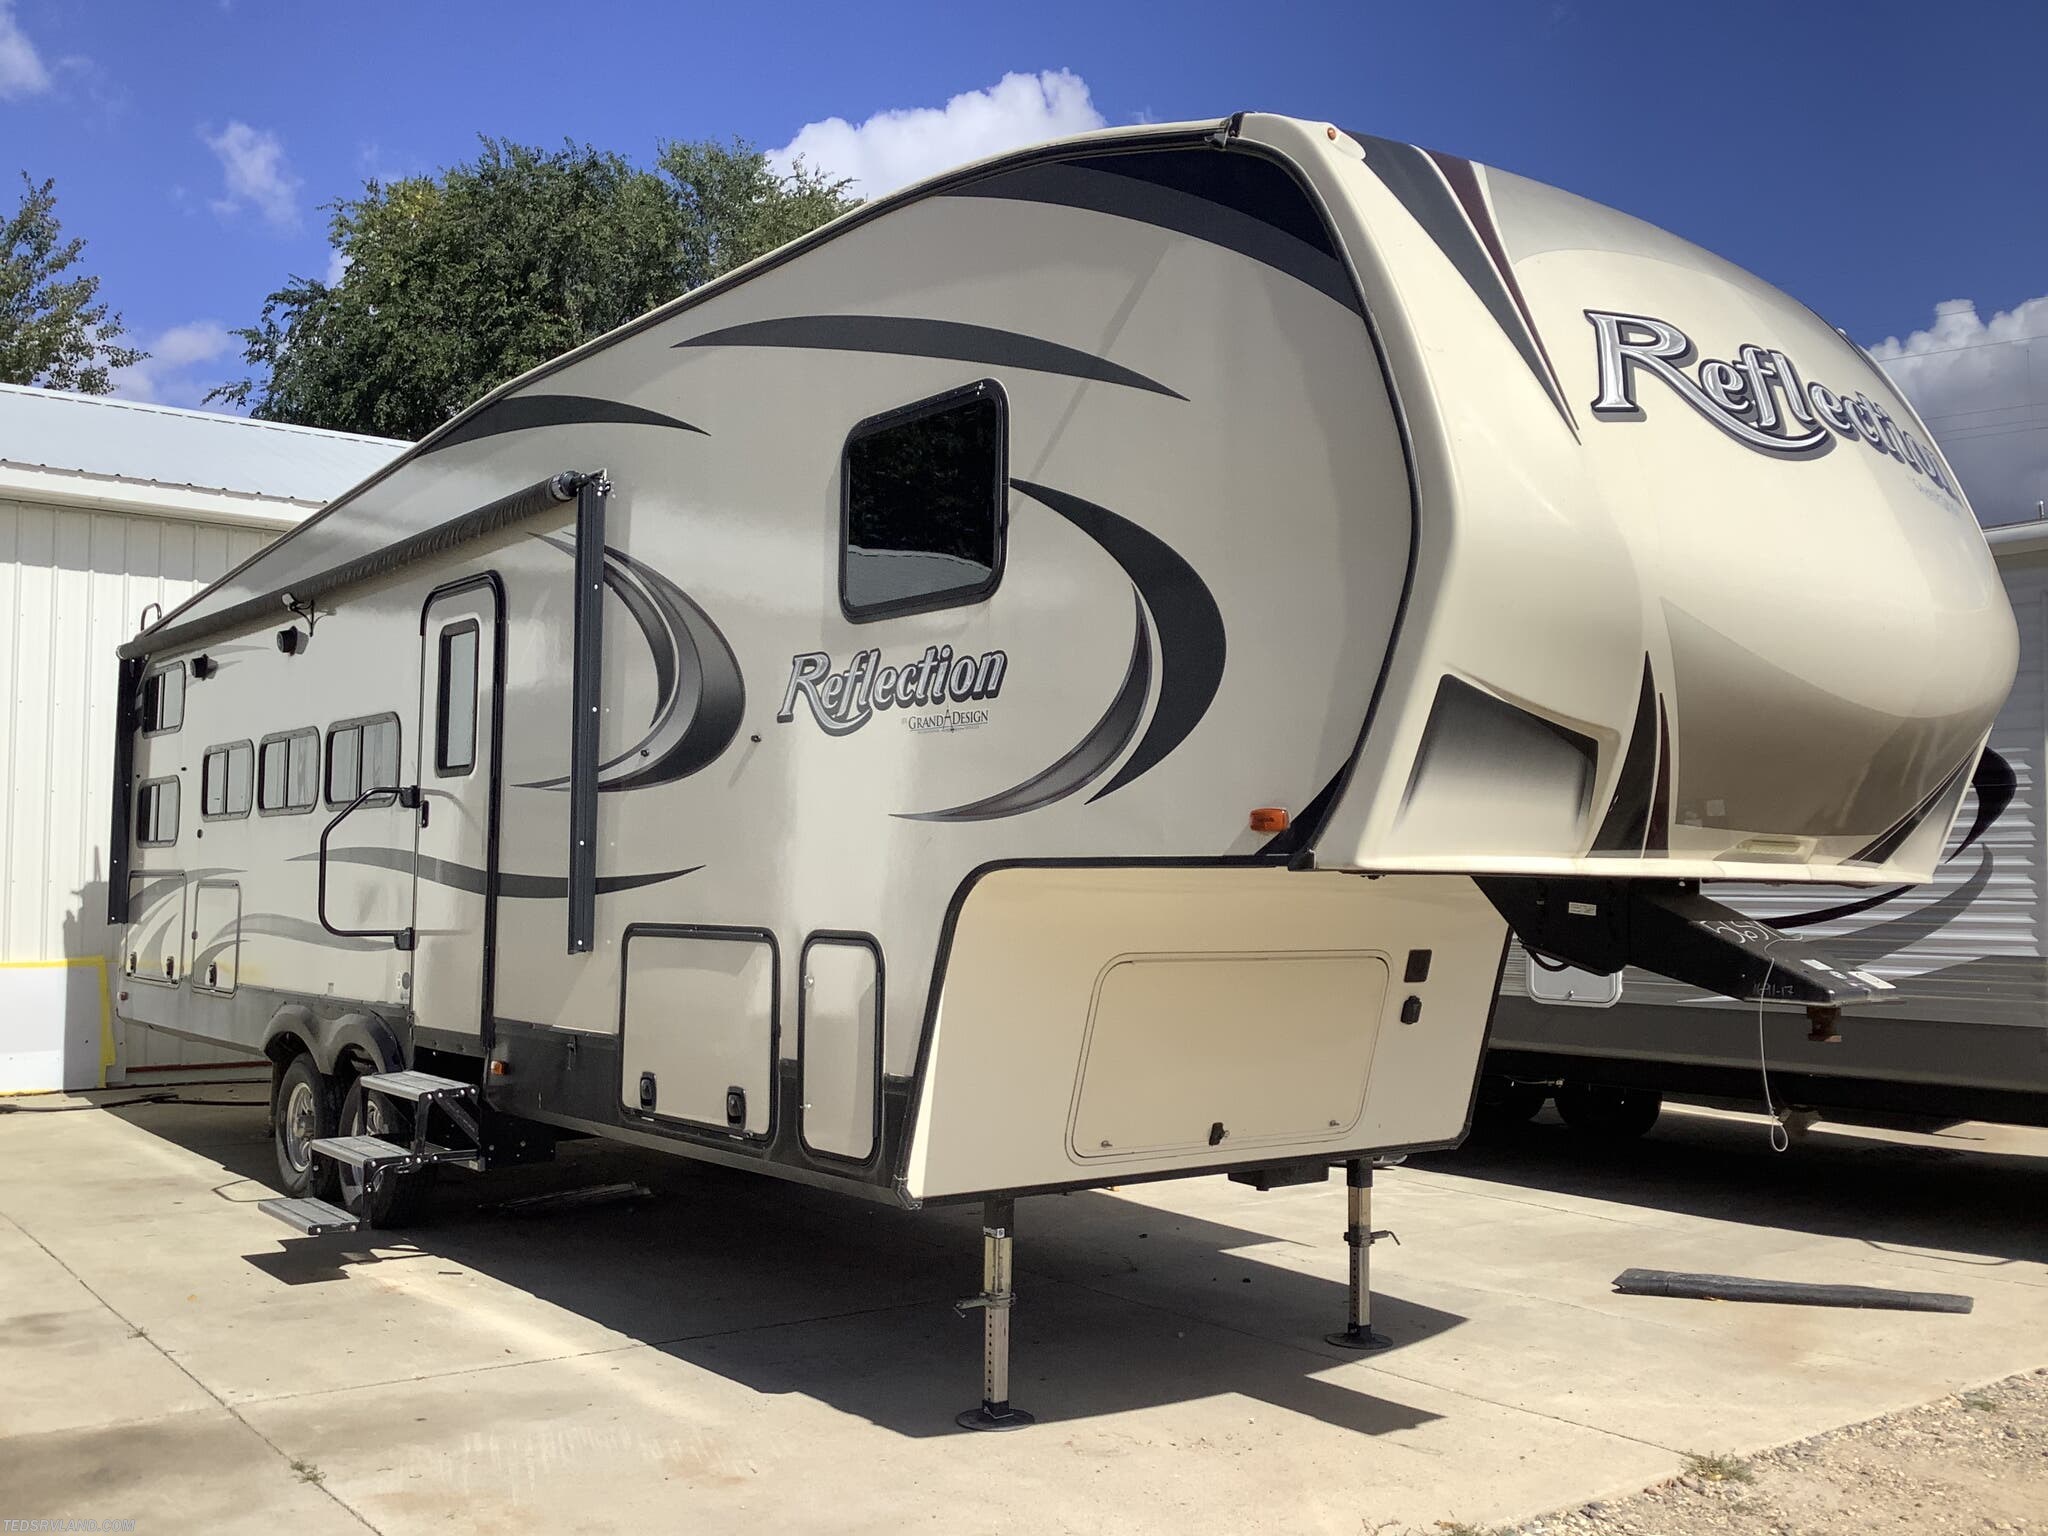 Used Grand Design RV Fifth Wheel trailers for sale in NC 5th Wheel Camper For Sale By Owner Near Me